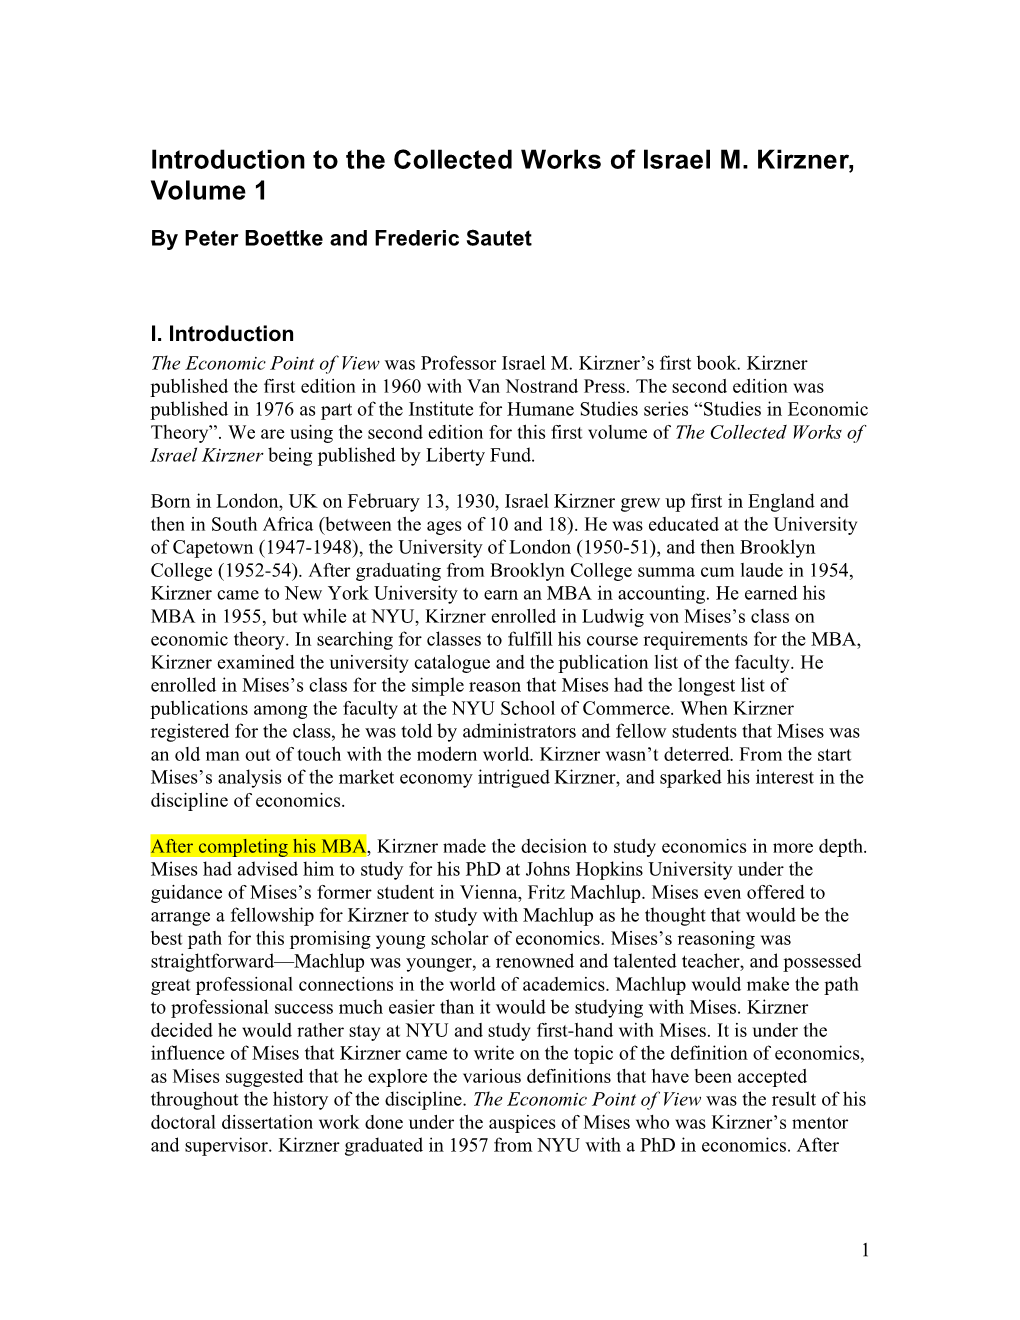 Introduction to the Collected Works of Israel M. Kirzner, Volume 1